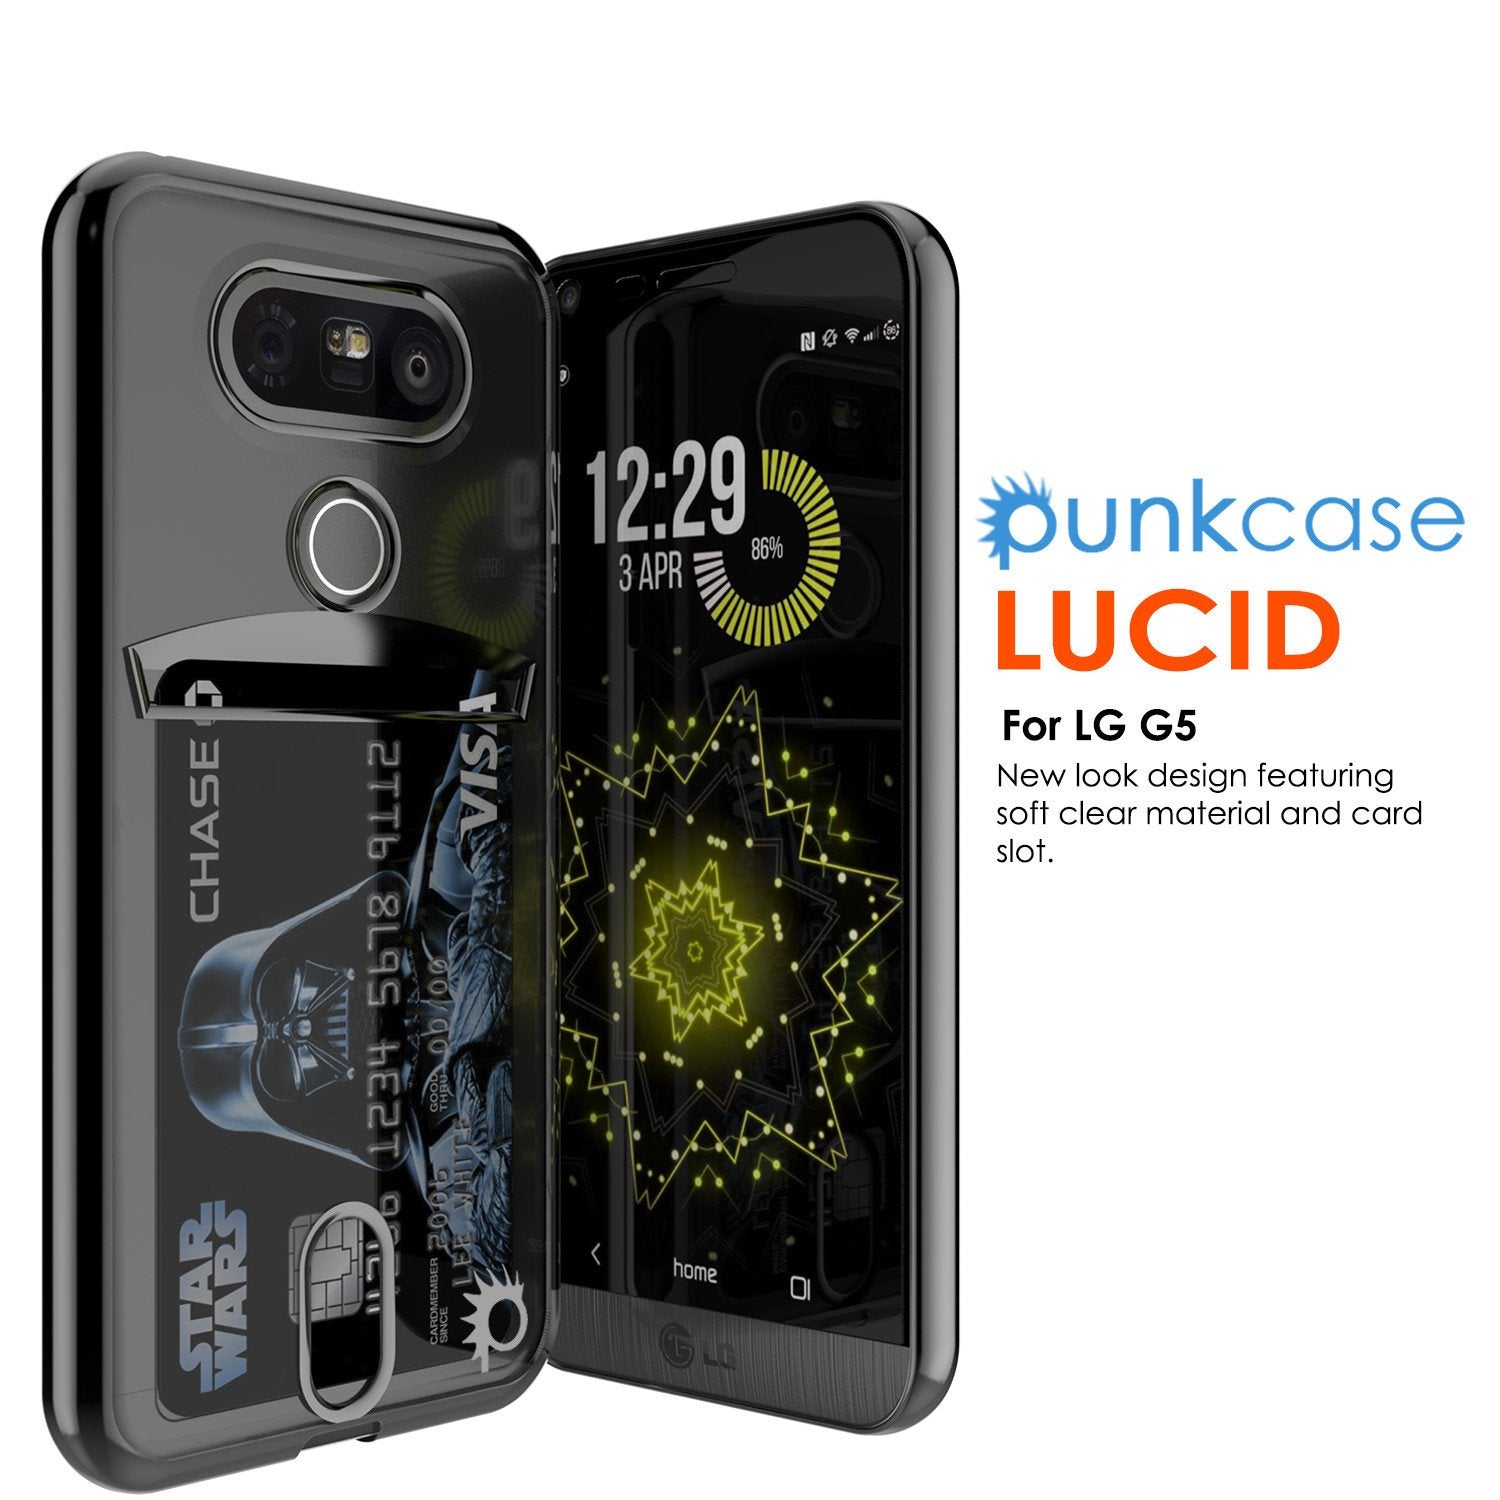 LG G5 Case, PUNKCASE® Black LUCID Series | Card Slot | PUNK SHIELD Screen Protector | Ultra Fit